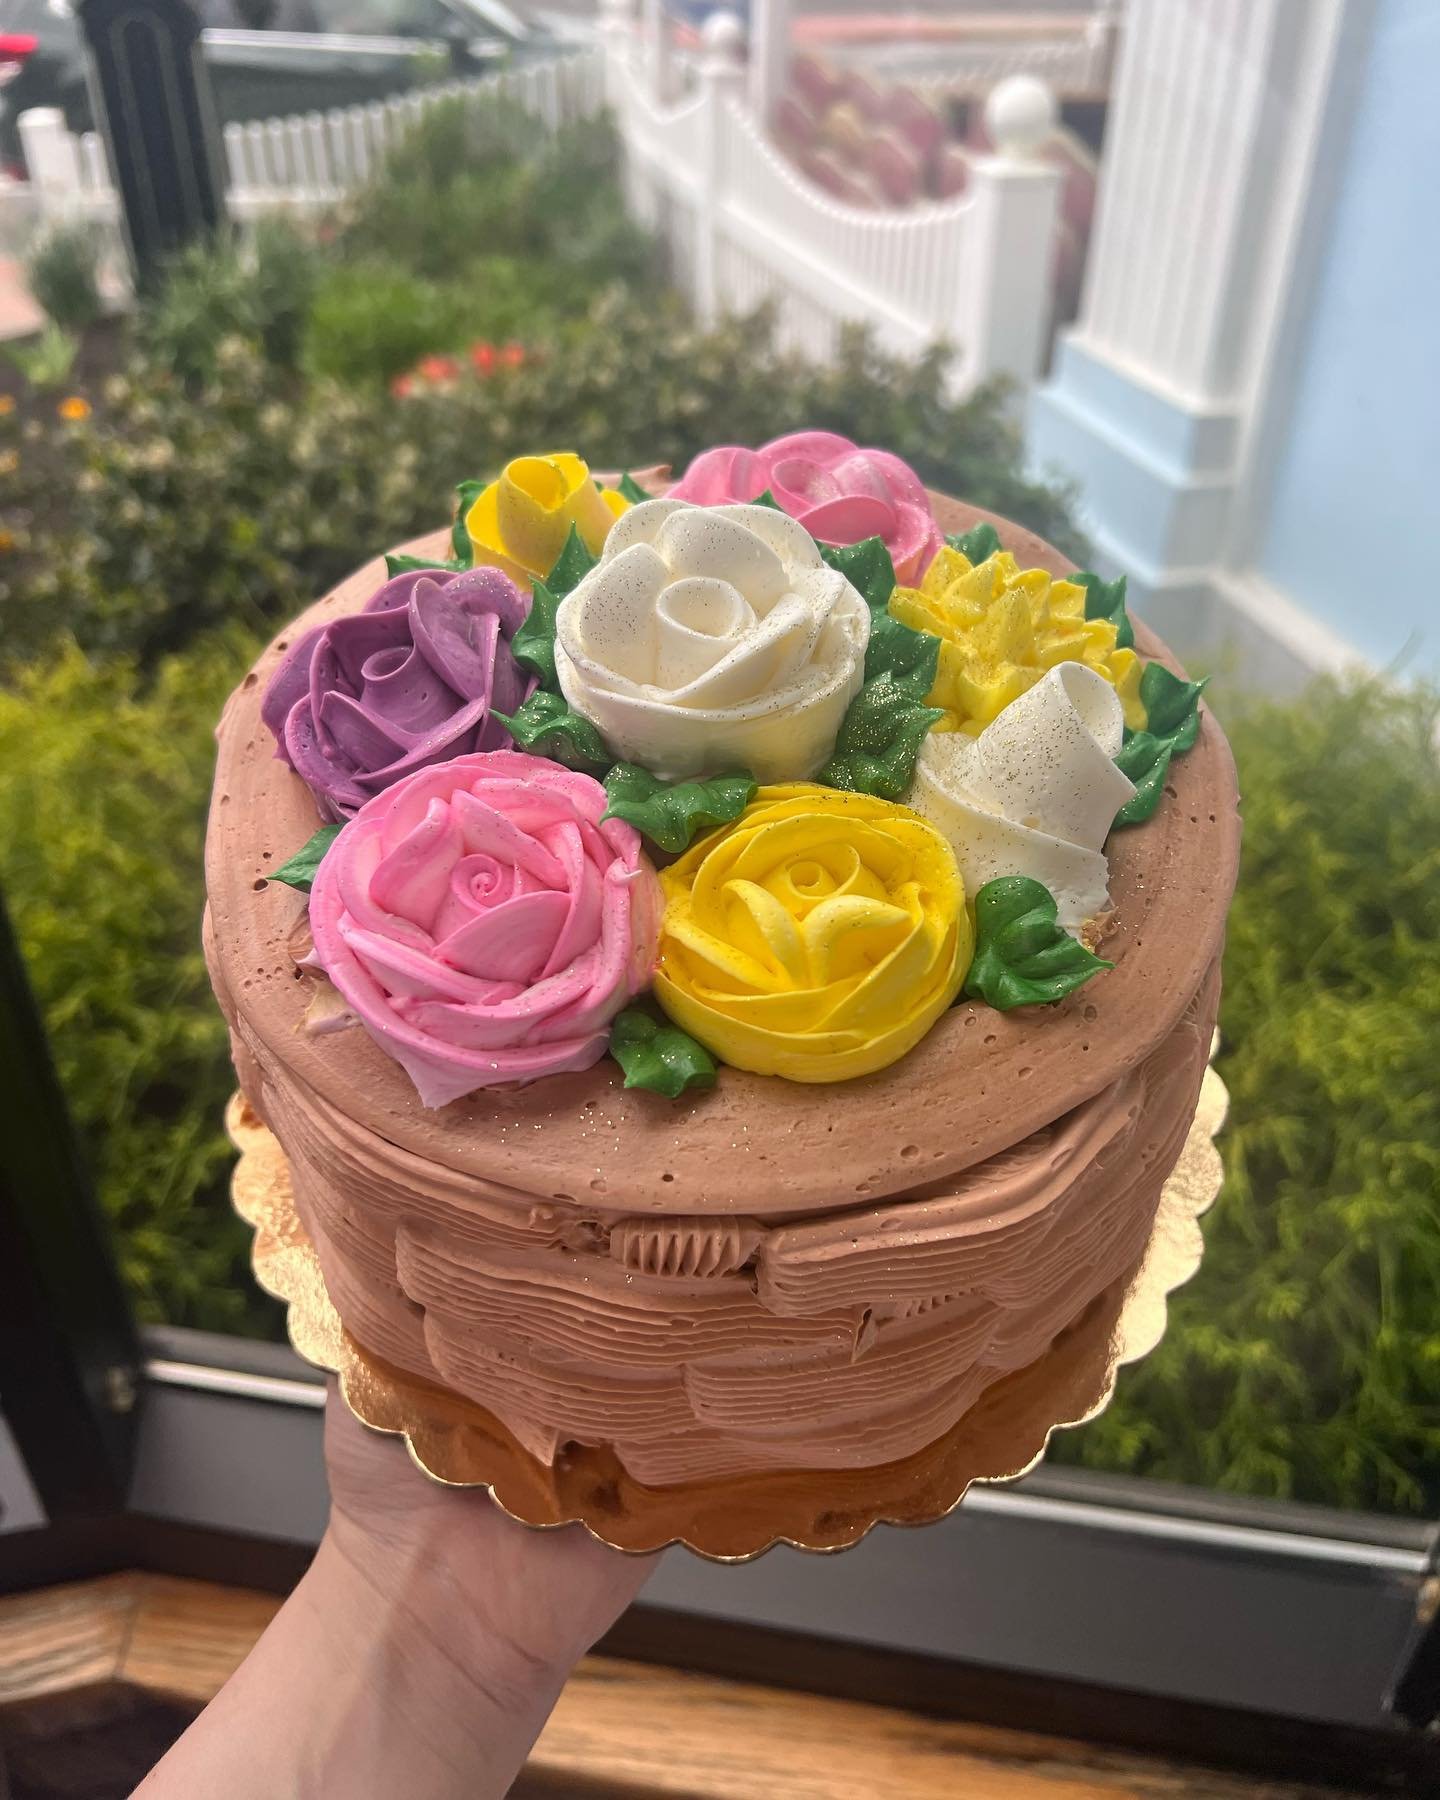 Tell mom you love her with a beautiful basket of flowers 💐🌸 💖
-
-
#flowerbasket #cake #bakery #longisland #flowercake #mothersday